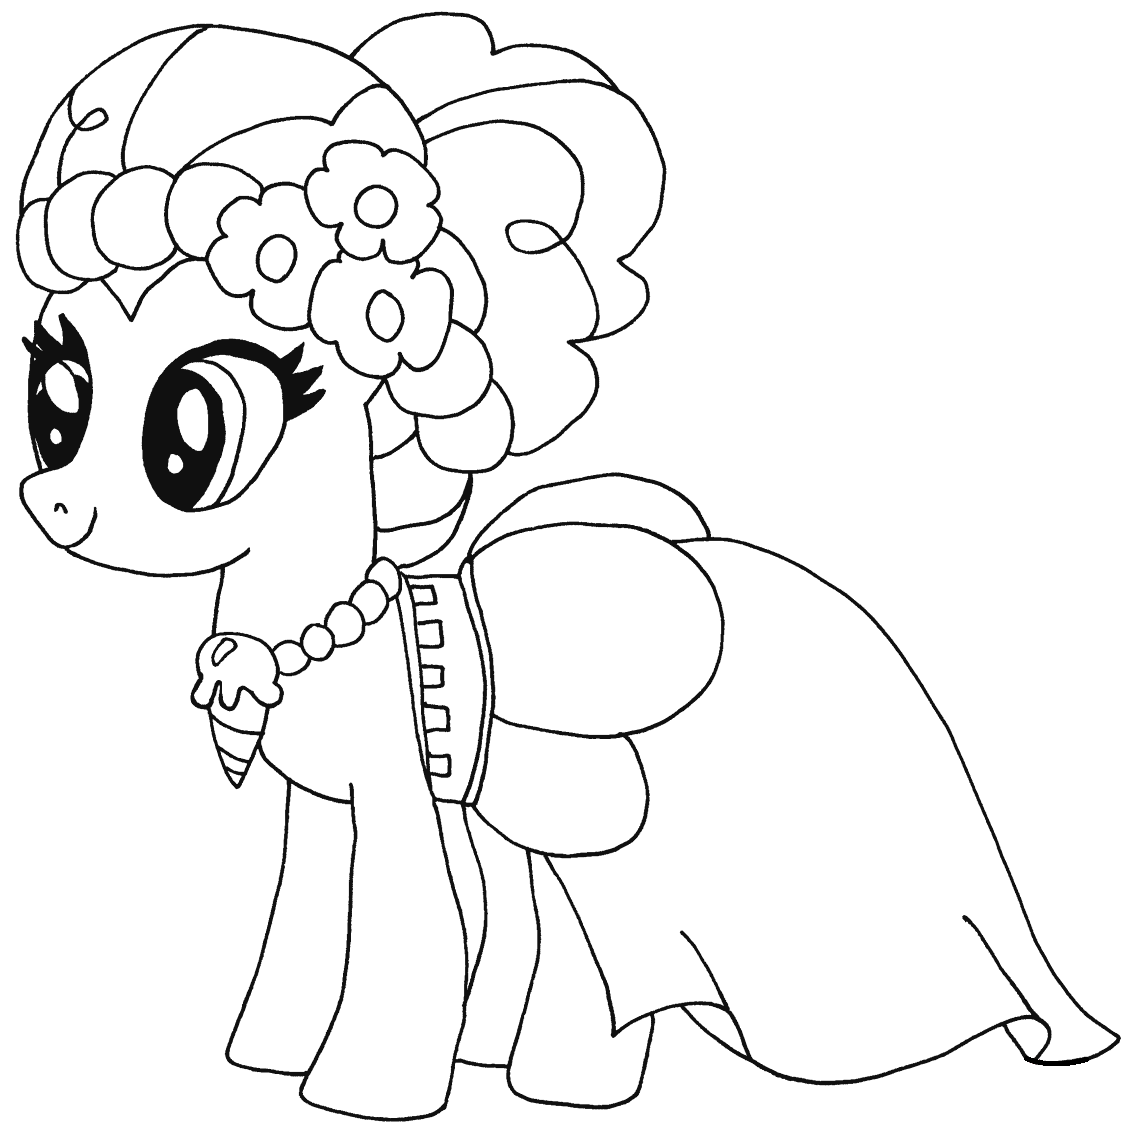 Lovely Pinkie Pie Coloring Page - Free Printable Coloring Pages for Kids